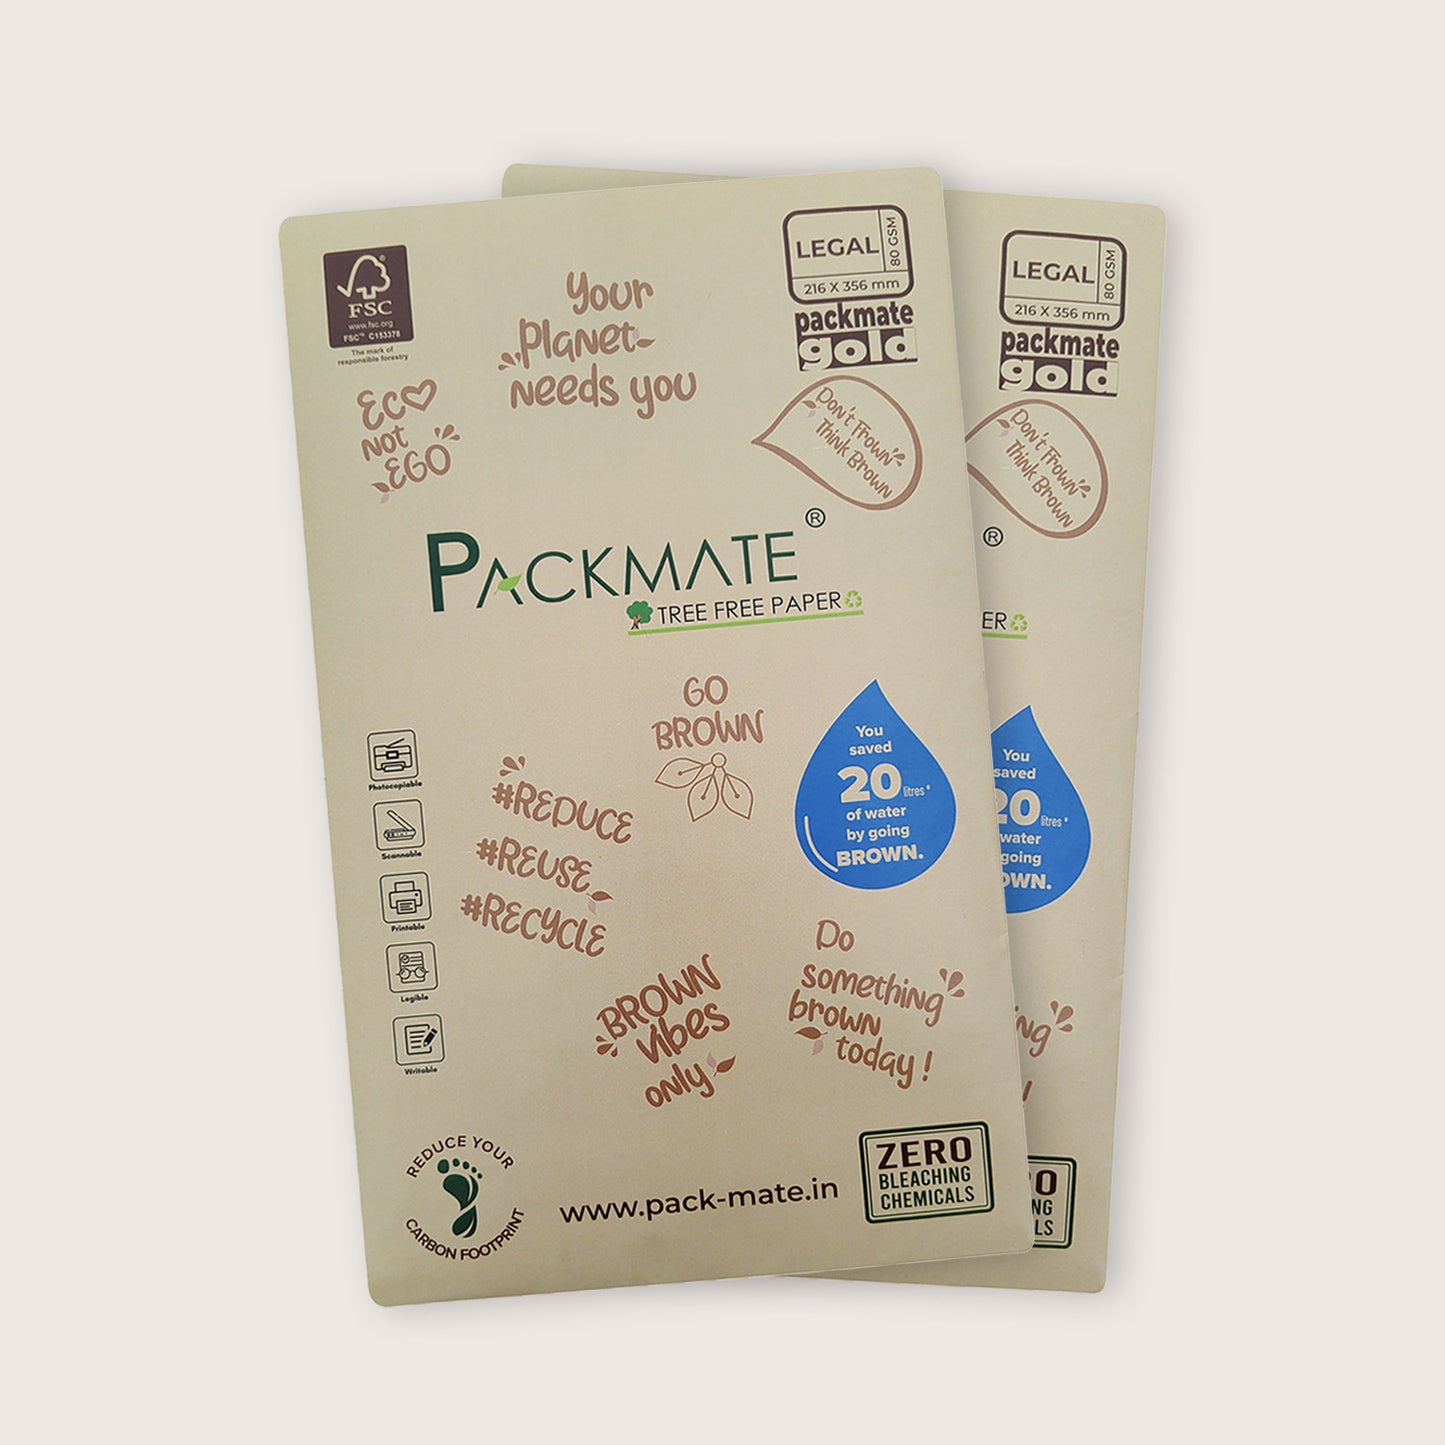 Packmate Gold Copier - Legal,1 Ream, 500 Sheet |  Made From 100% Recycled Paper